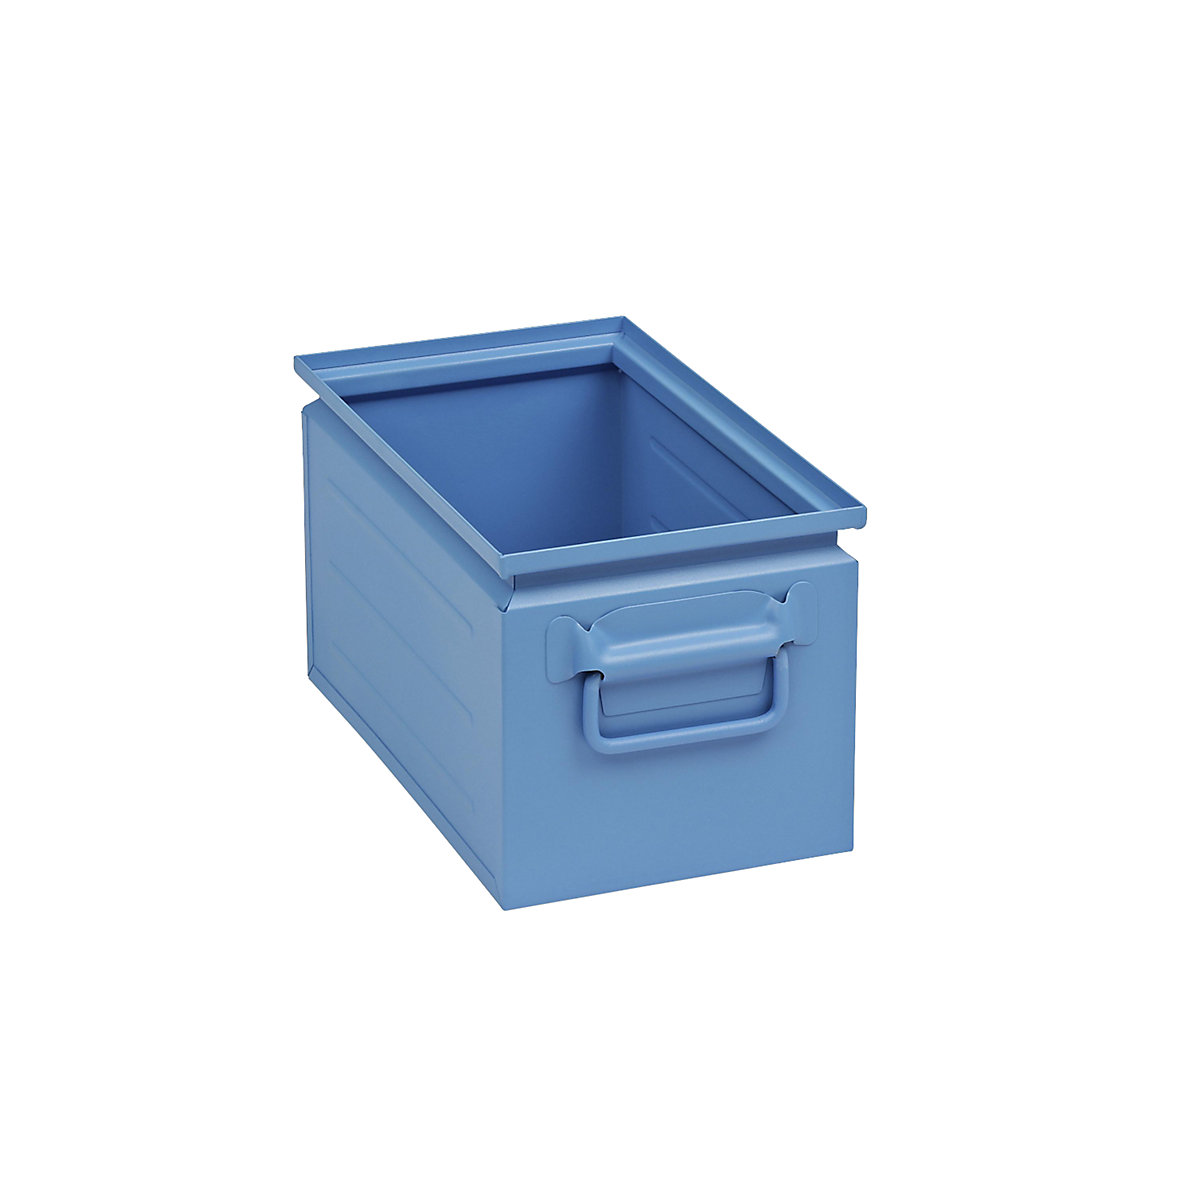 Stacking container made of sheet steel, capacity approx. 14 l, light blue RAL 5012